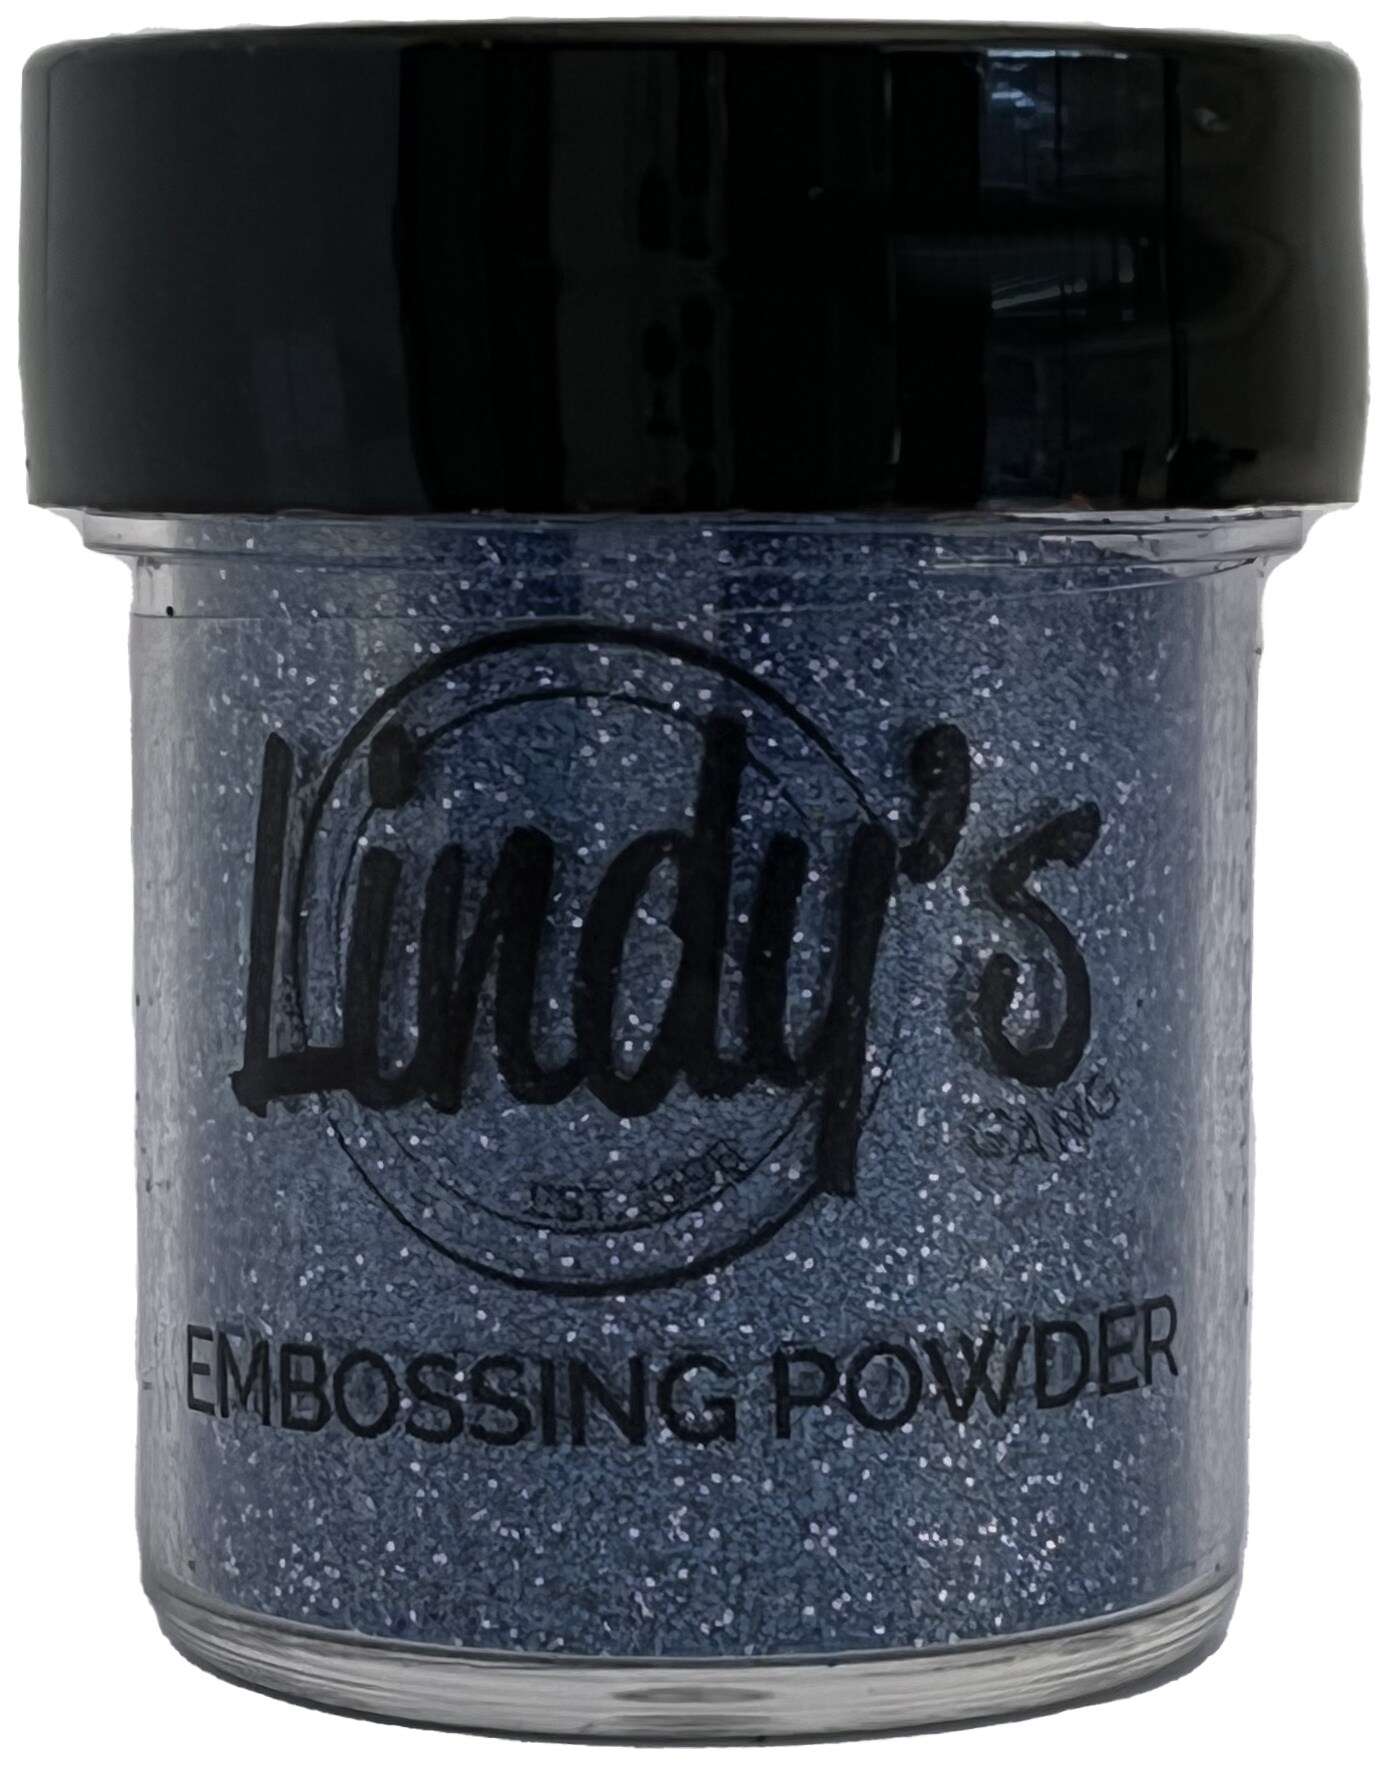 Lindy's Stamp Gang 2-Tone Embossing Powder - 5 count, 0.5 oz each